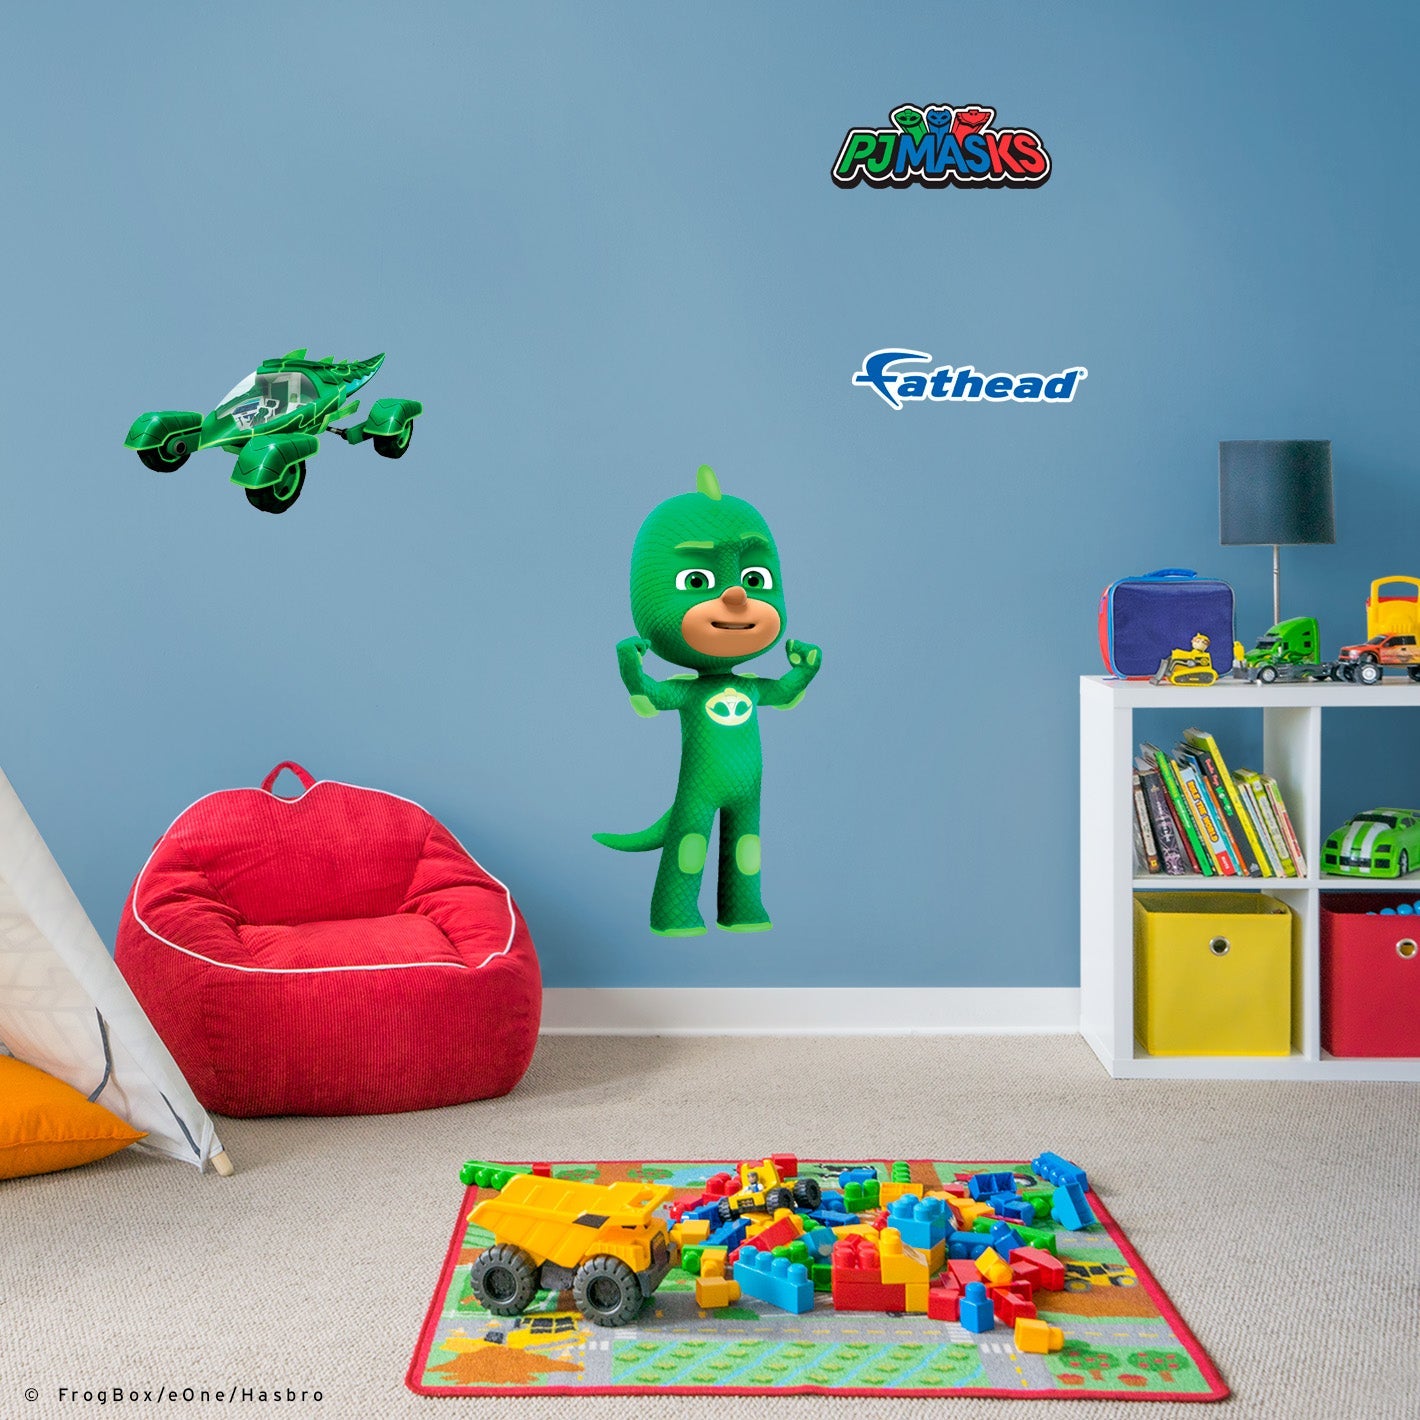 PJ Masks: Gekko RealBigs - Officially Licensed Hasbro Removable Adhesive Decal